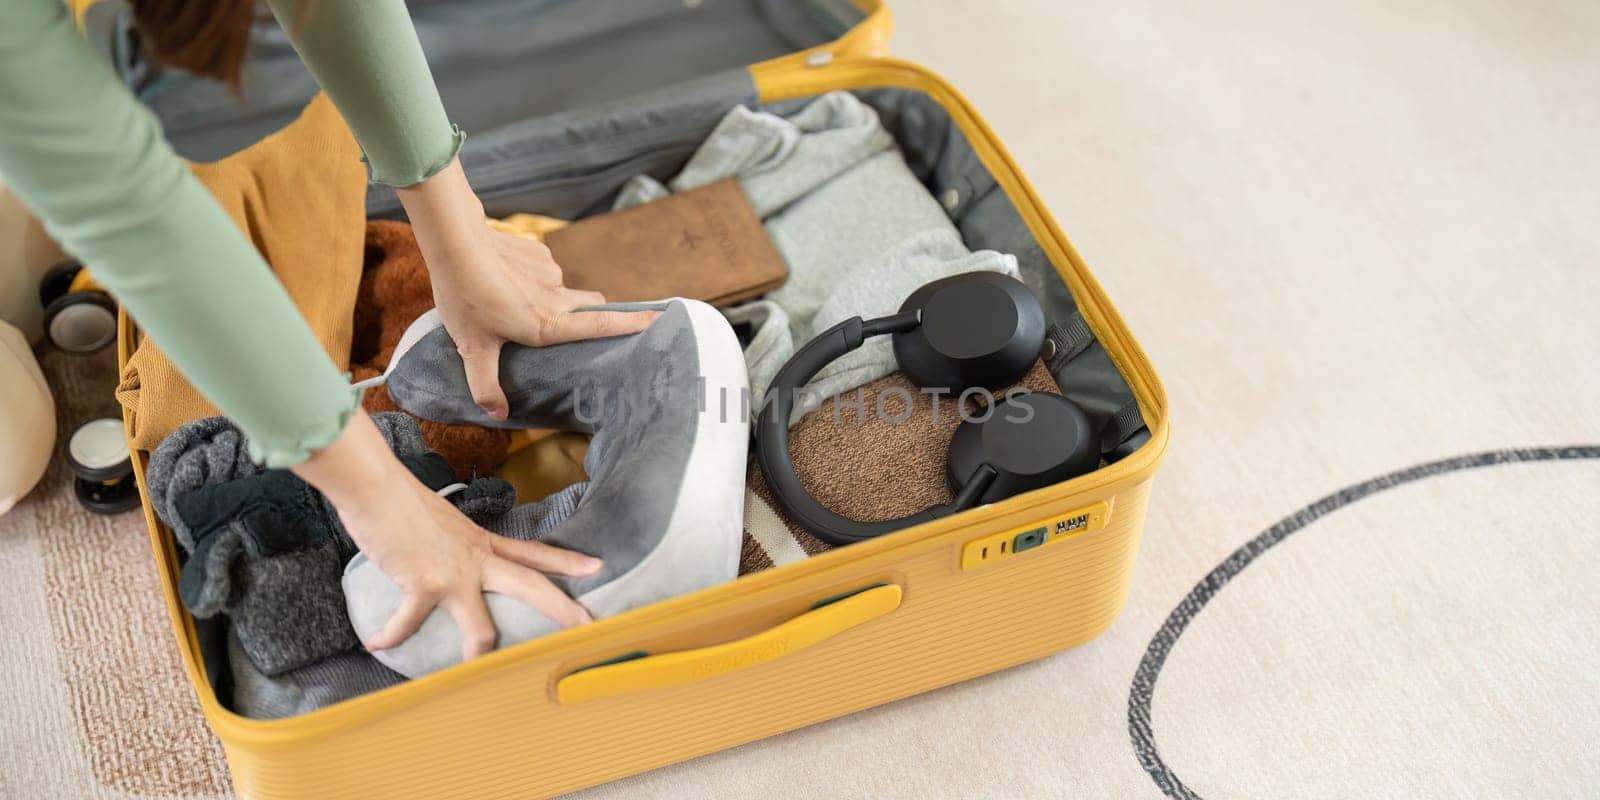 Happy Asian young woman packing suitcase at home. Preparing for summer holiday vacation abroad travel..